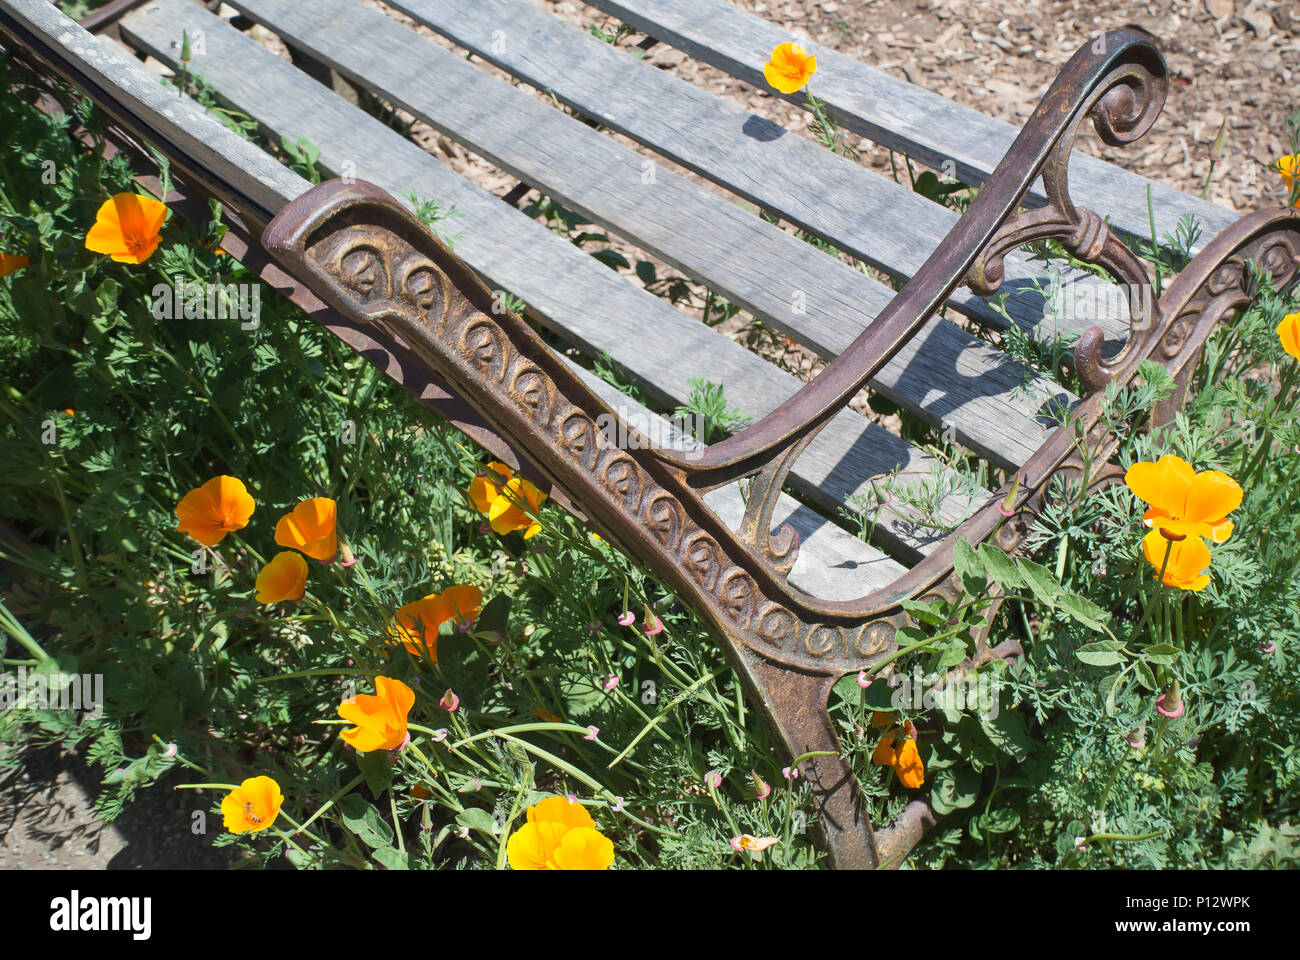 Garden Bench Surrounded by California Poppies Stock Photo